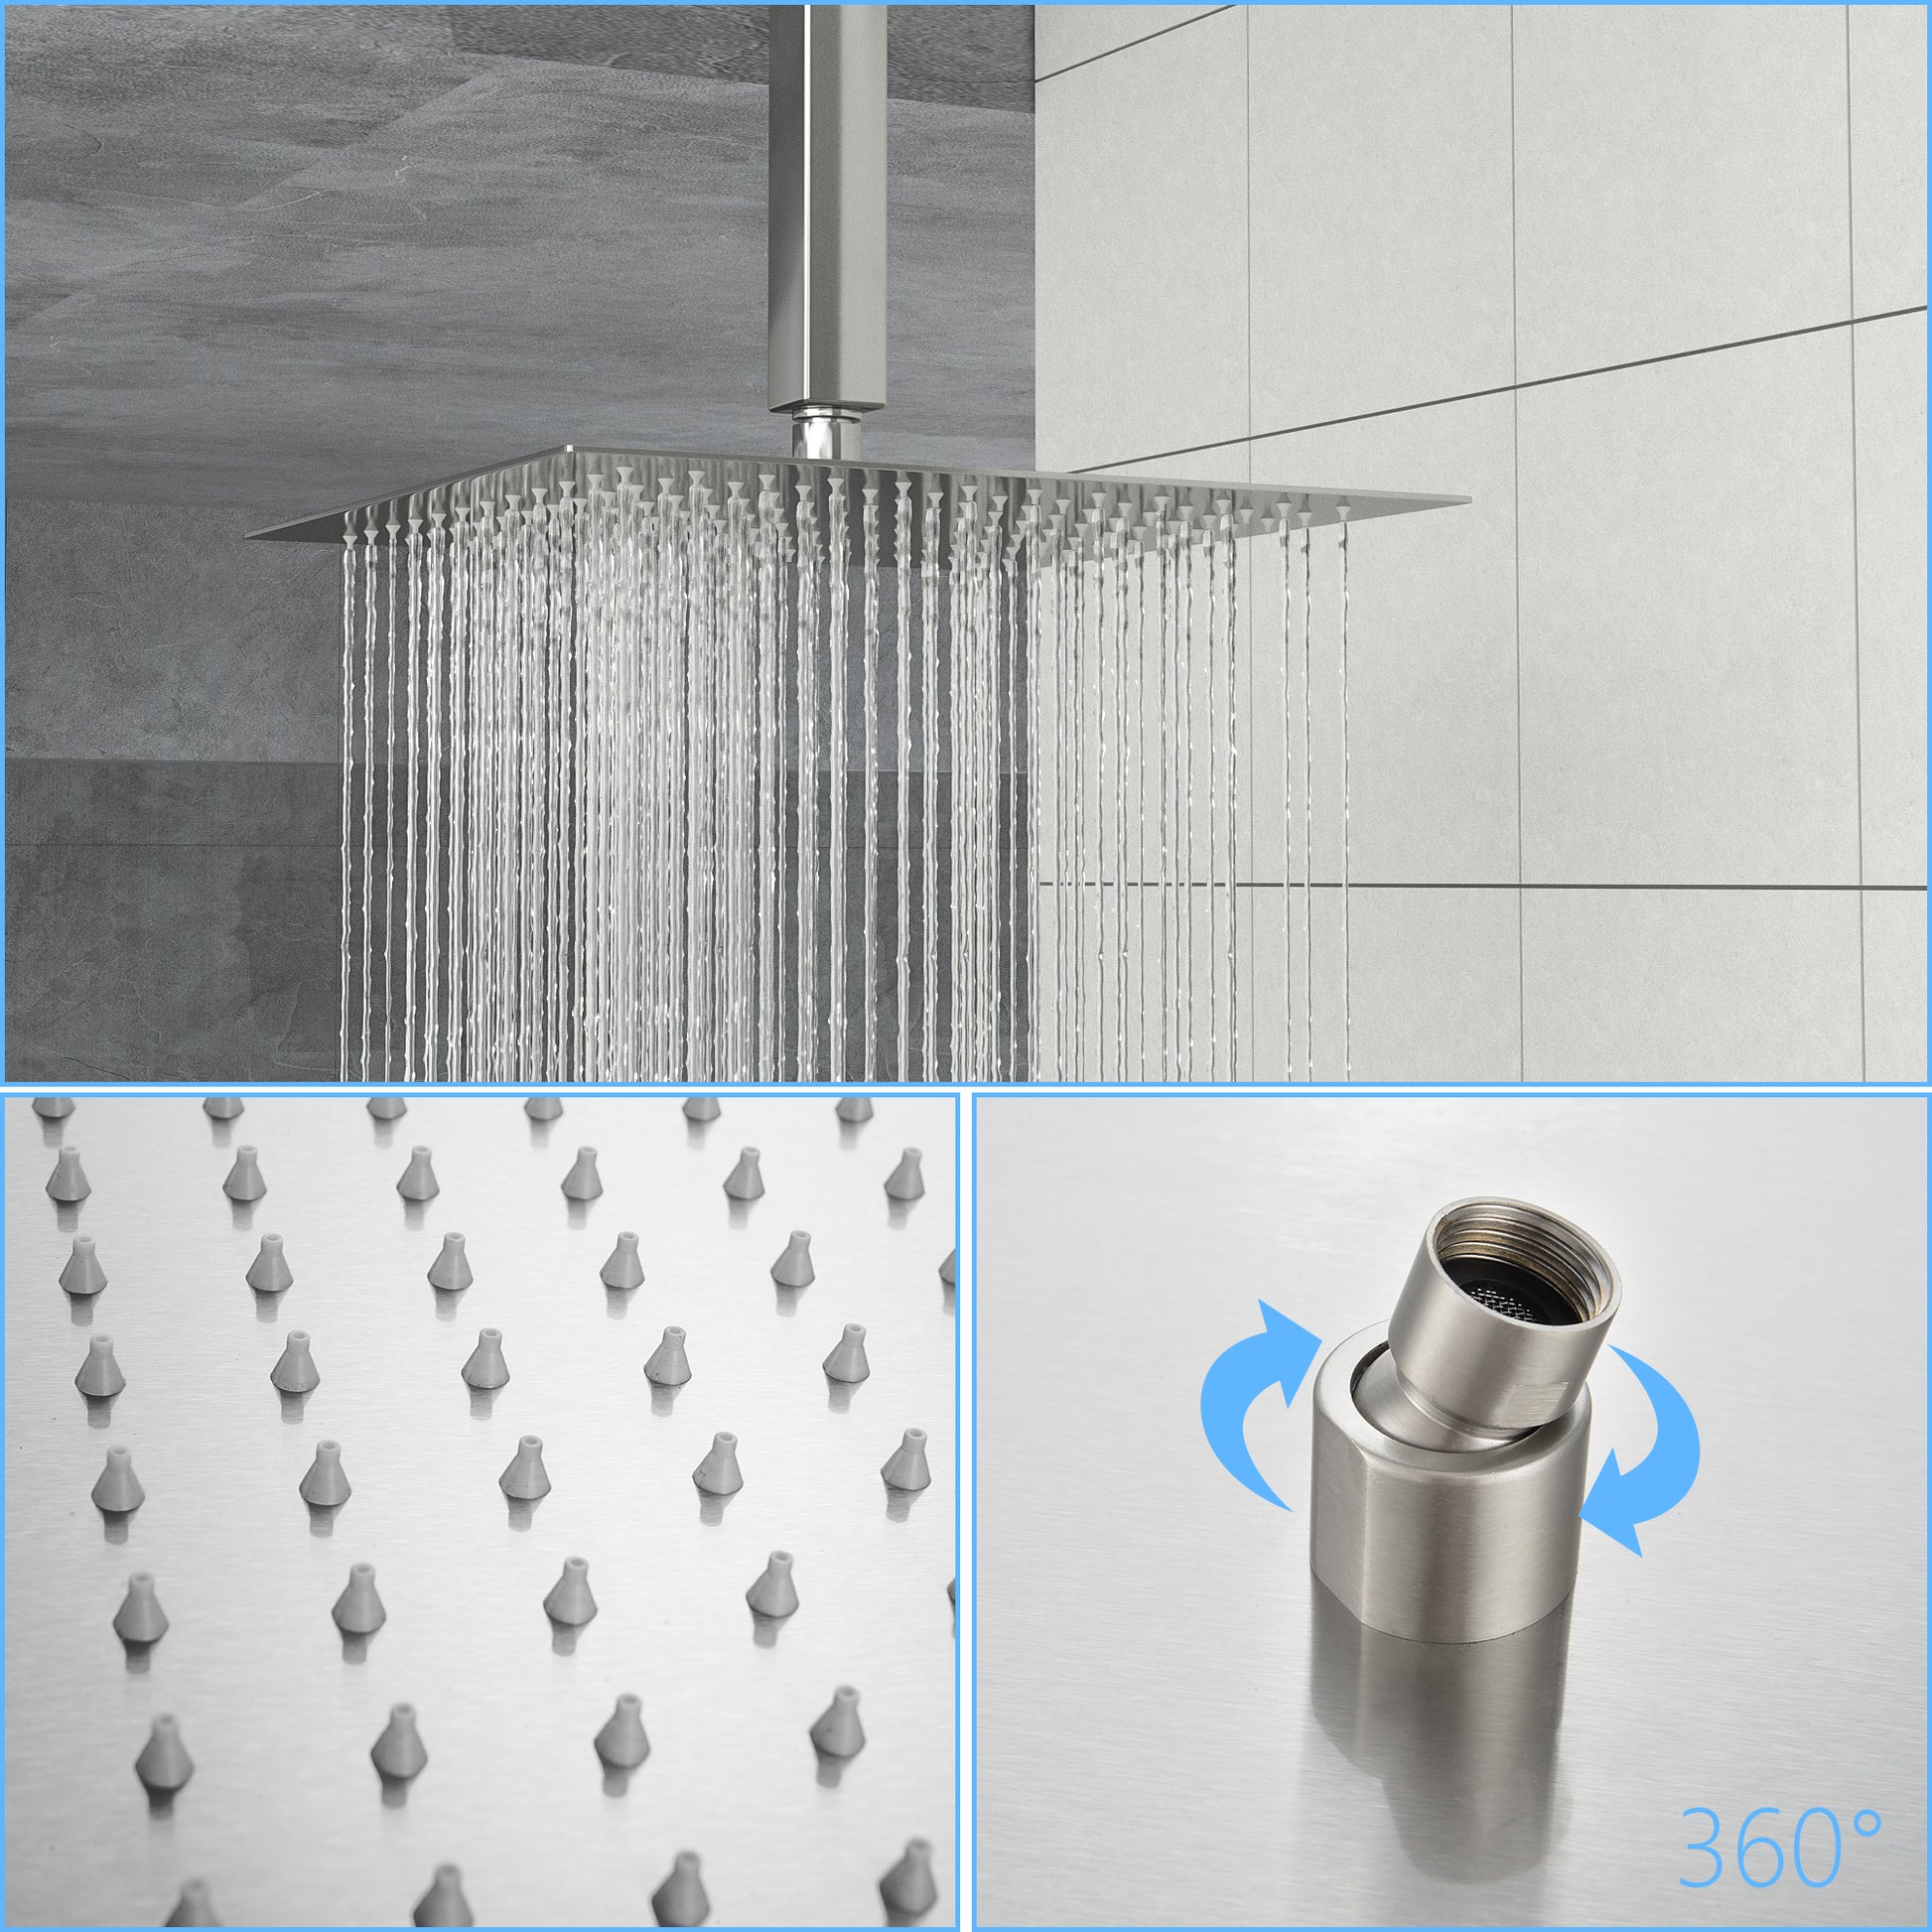 Rain Fixed Shower Head 16 Inch Square, Brushed Nickel brushed nickel-stainless steel